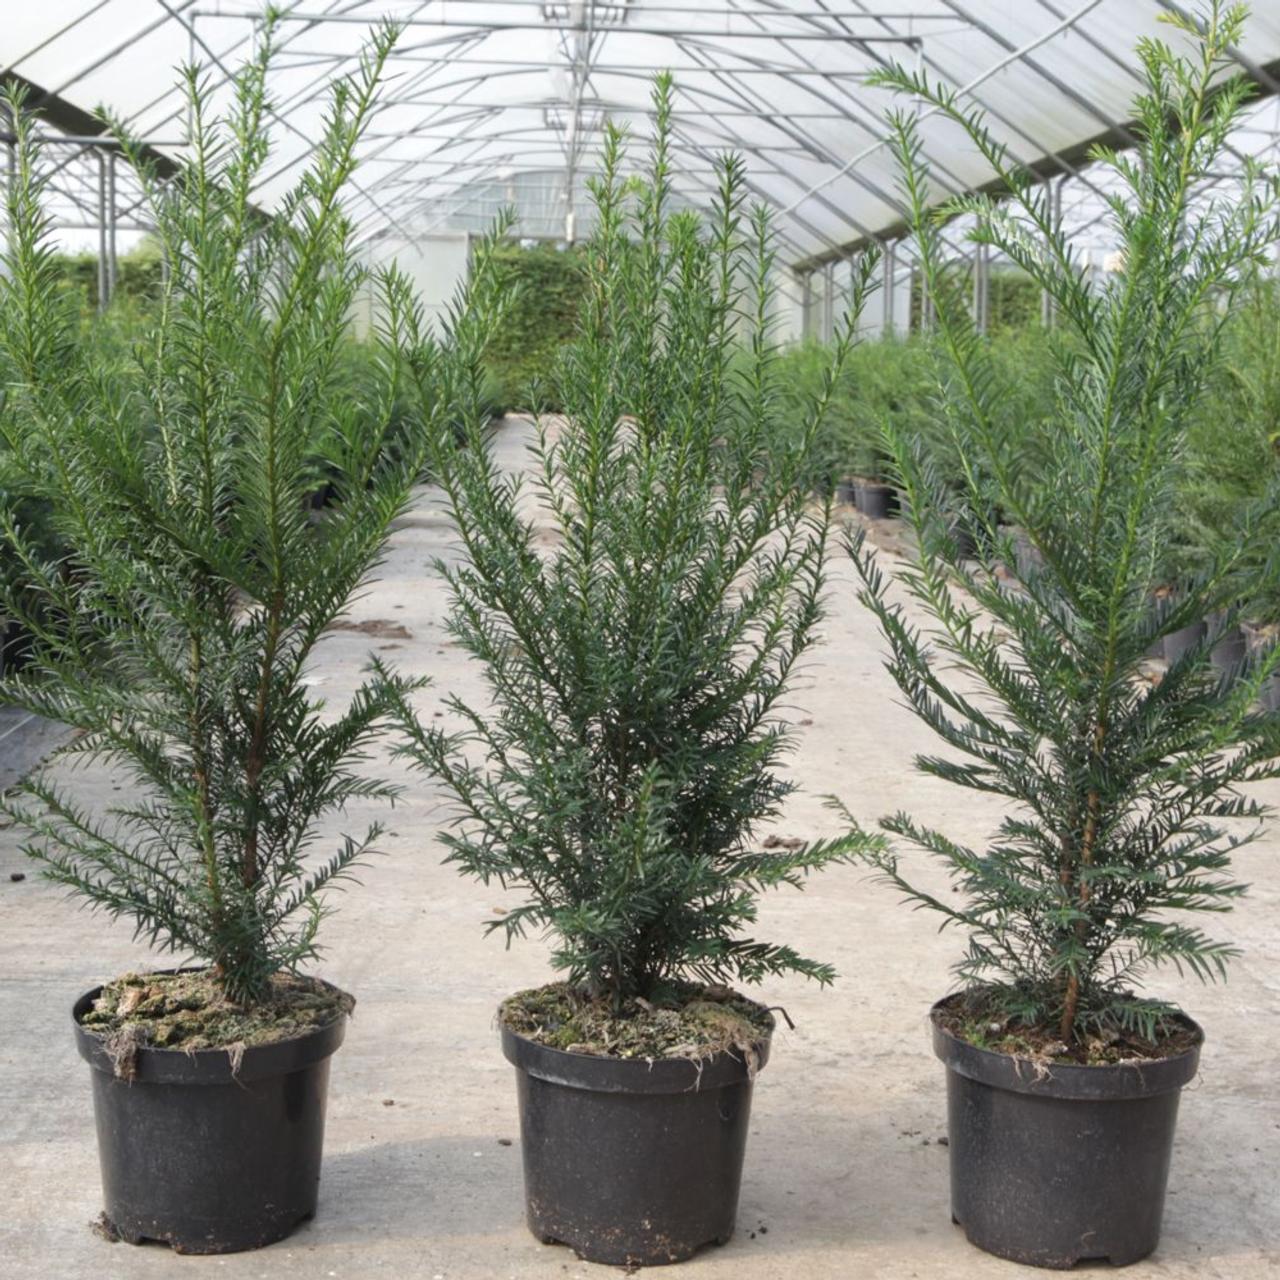 Taxus baccata plant